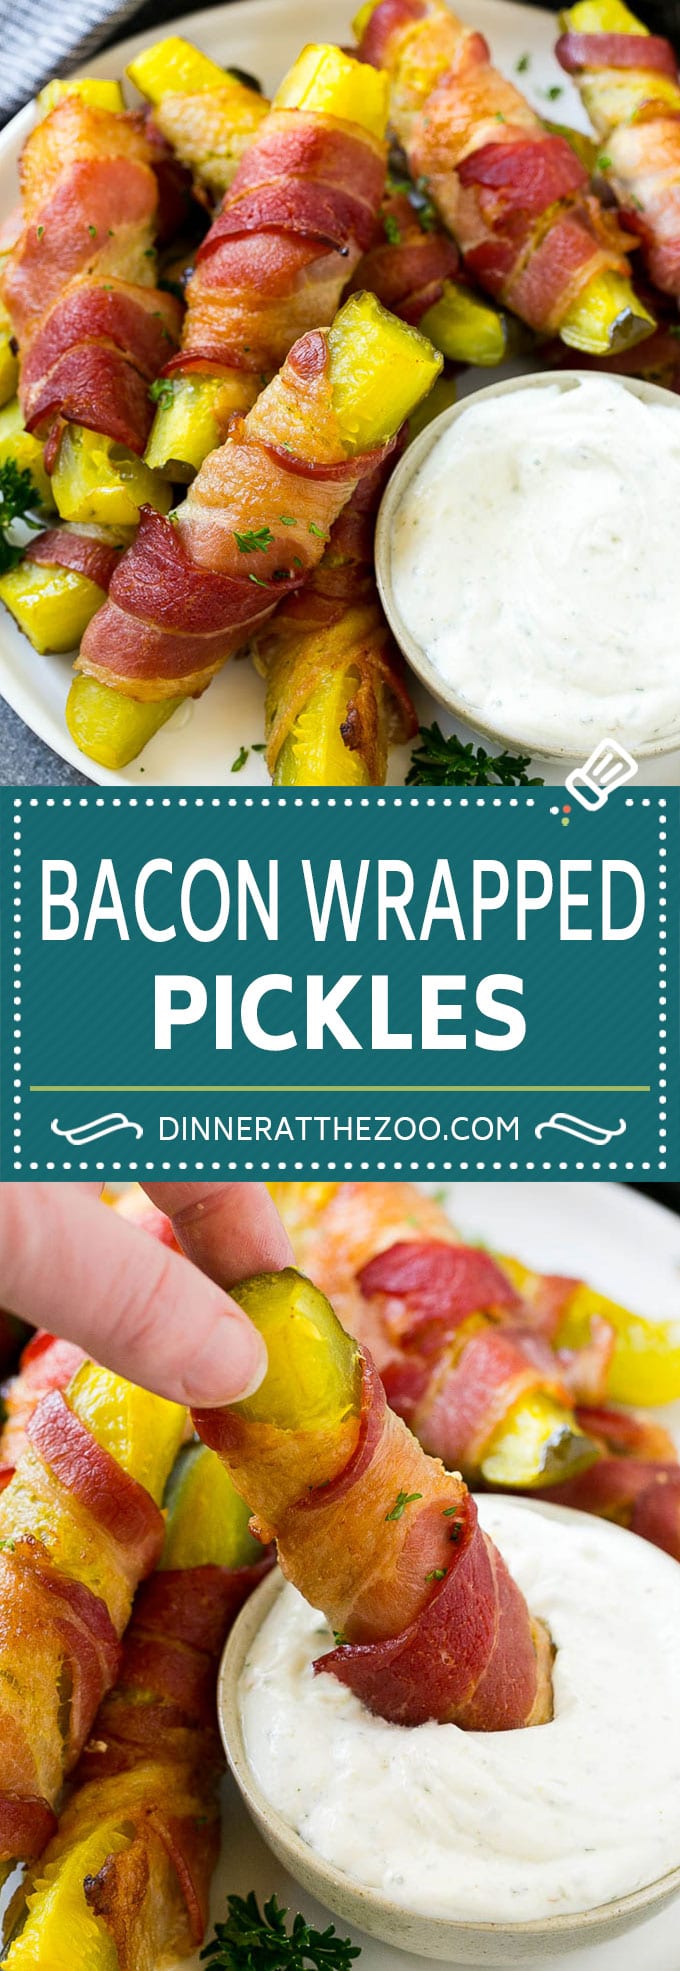 Bacon Wrapped Pickles Recipe | Pickle Fries | Low Carb Recipe #pickles #bacon #lowcarb #keto #dinneratthezoo